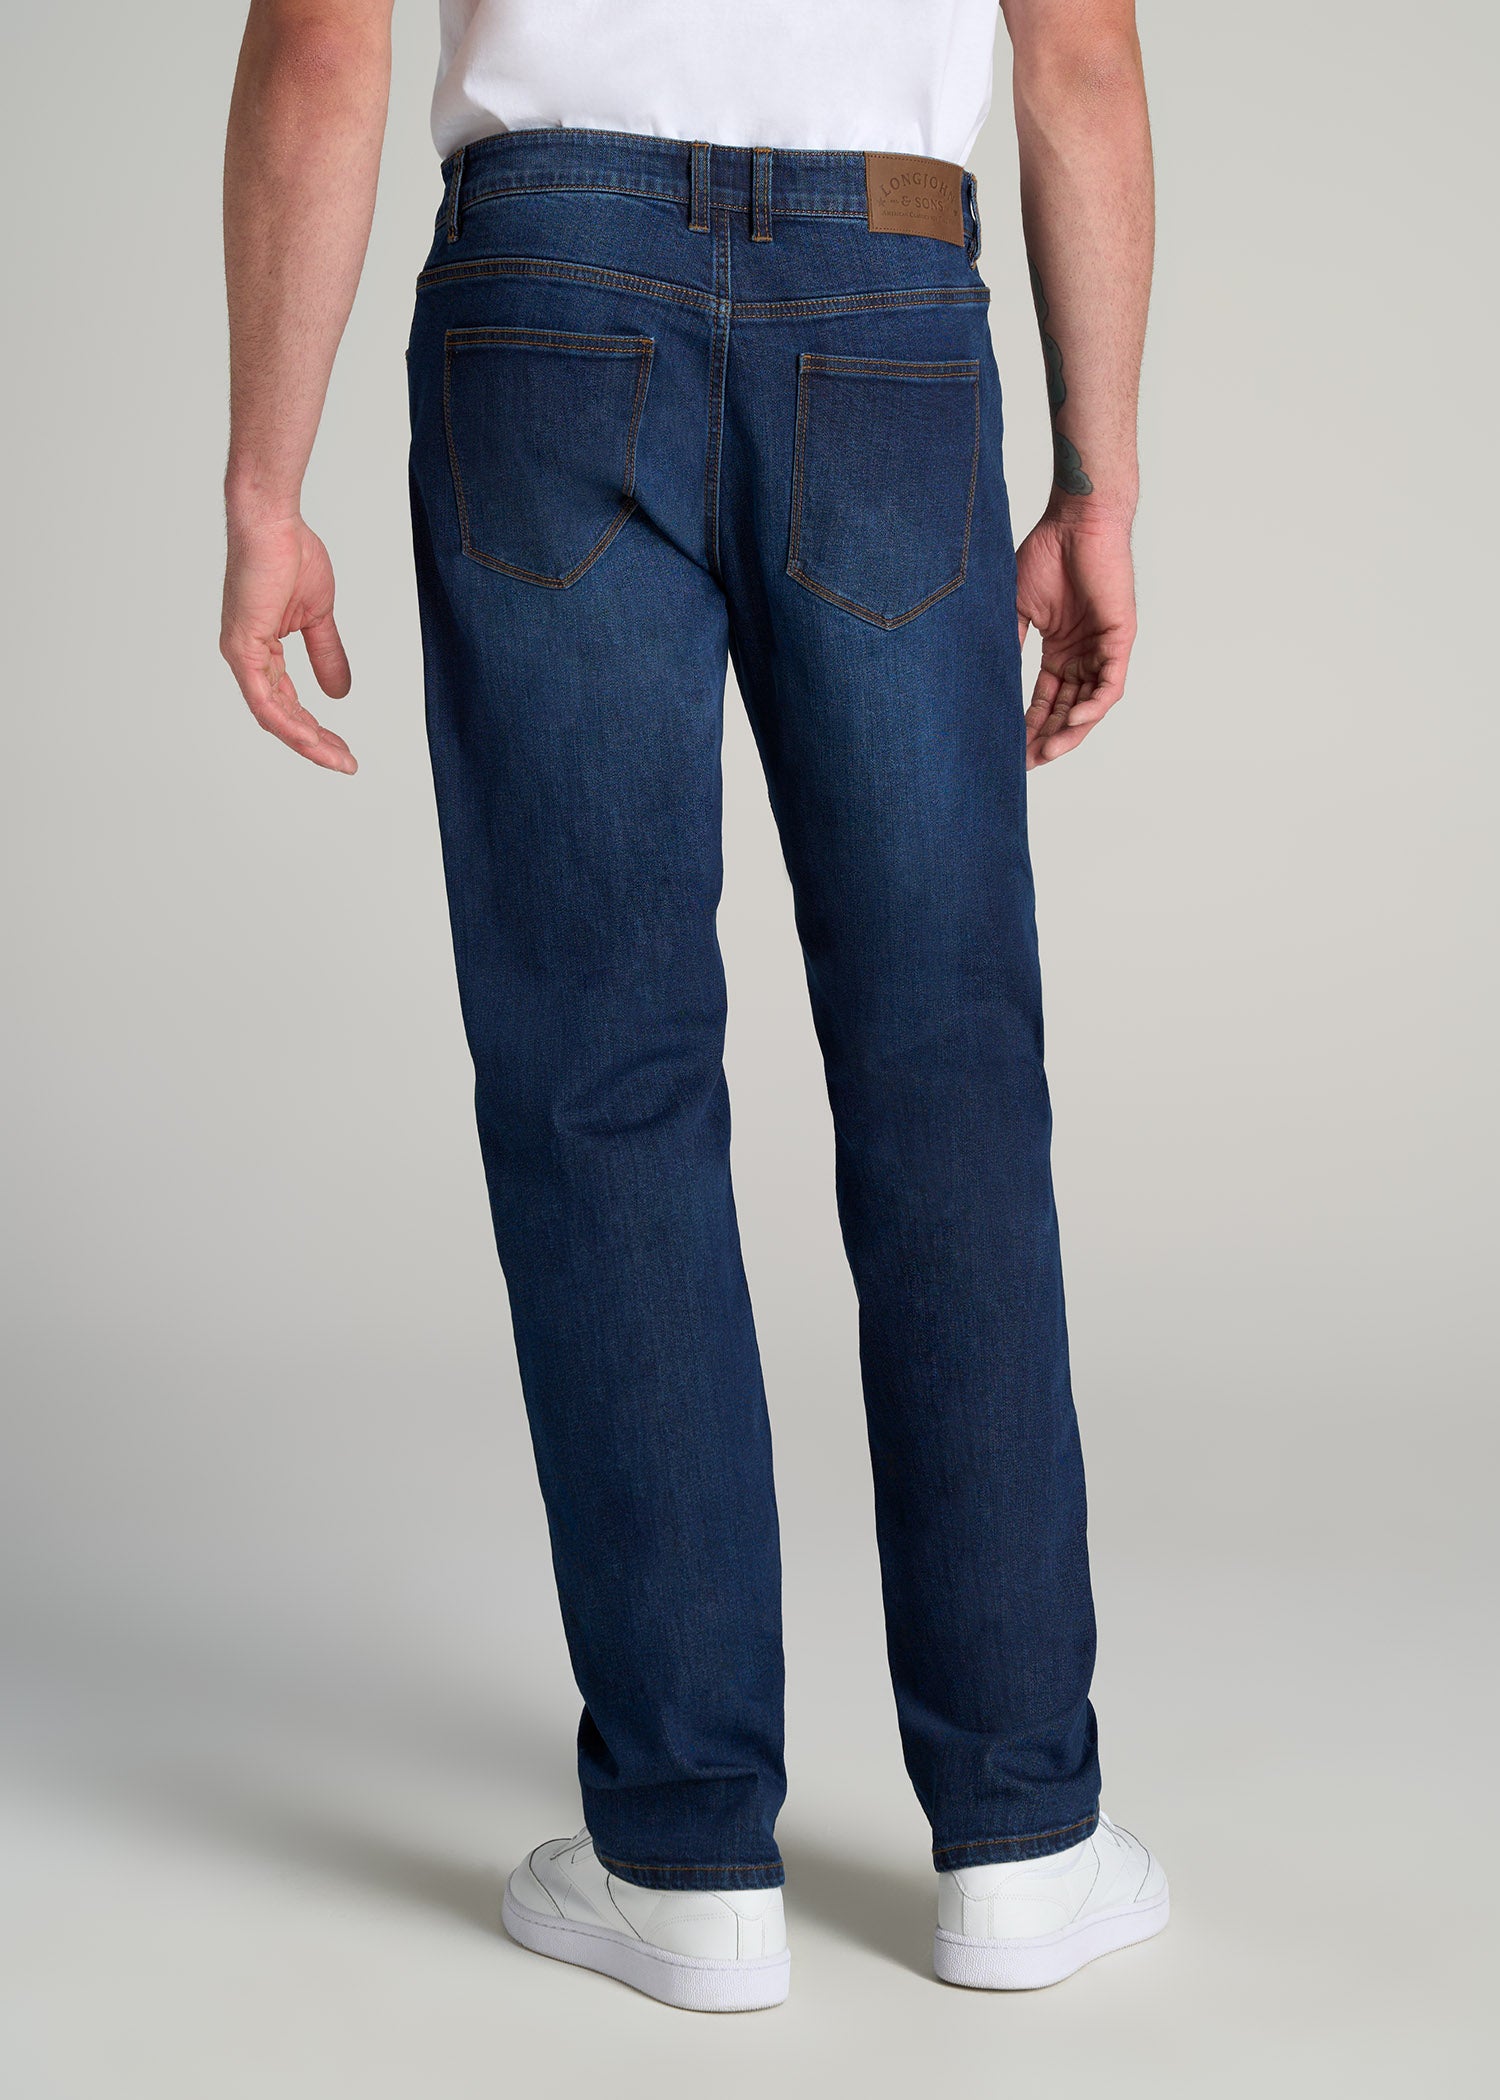 J1 STRAIGHT LEG Jeans for Tall Men in Signature Fade